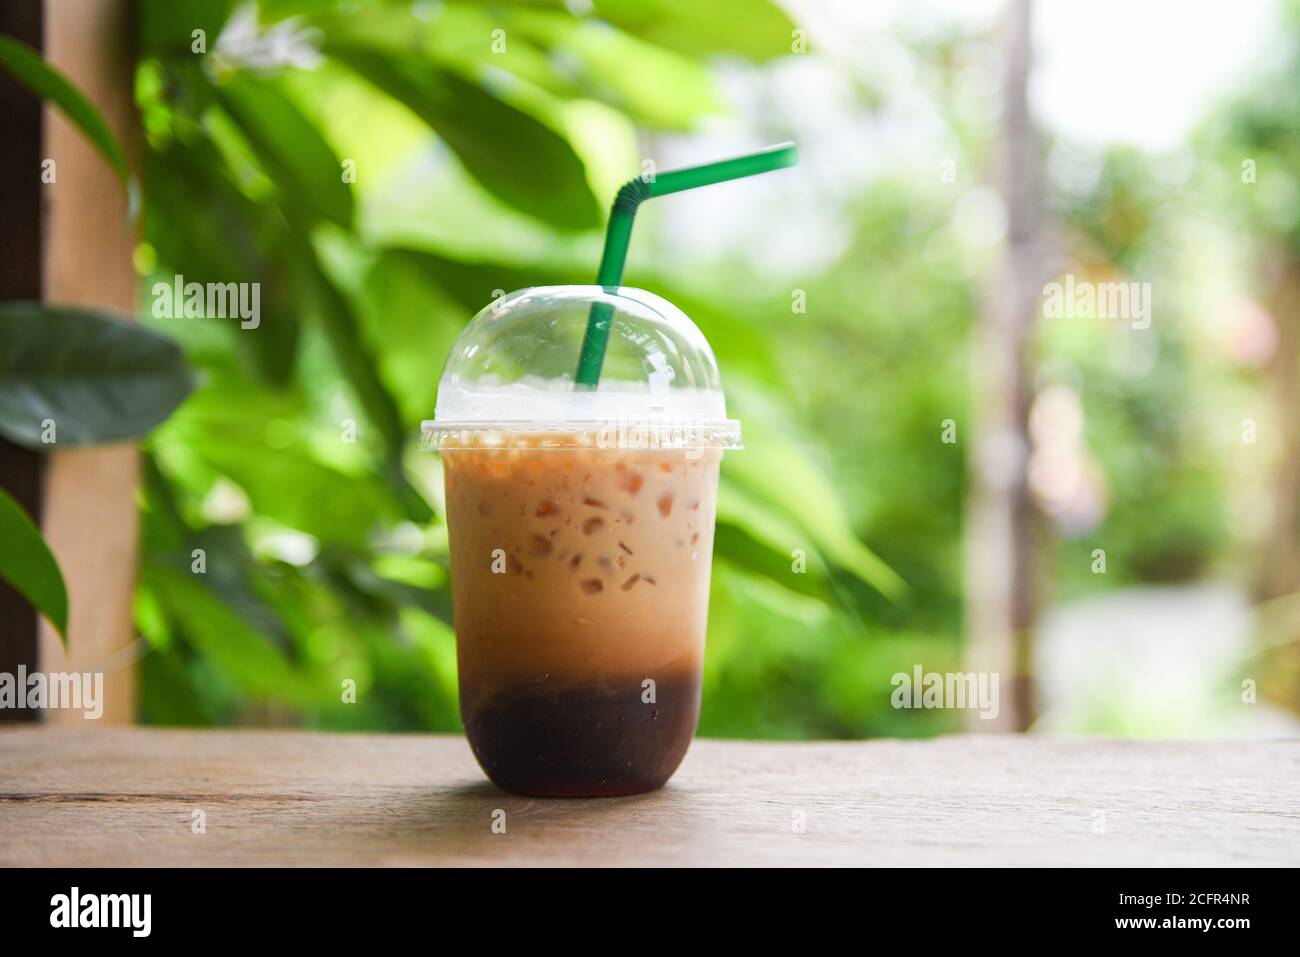 https://c8.alamy.com/comp/2CFR4NR/iced-coffee-latte-in-plastic-cup-on-wooden-table-and-nature-green-background-iced-drinks-2CFR4NR.jpg